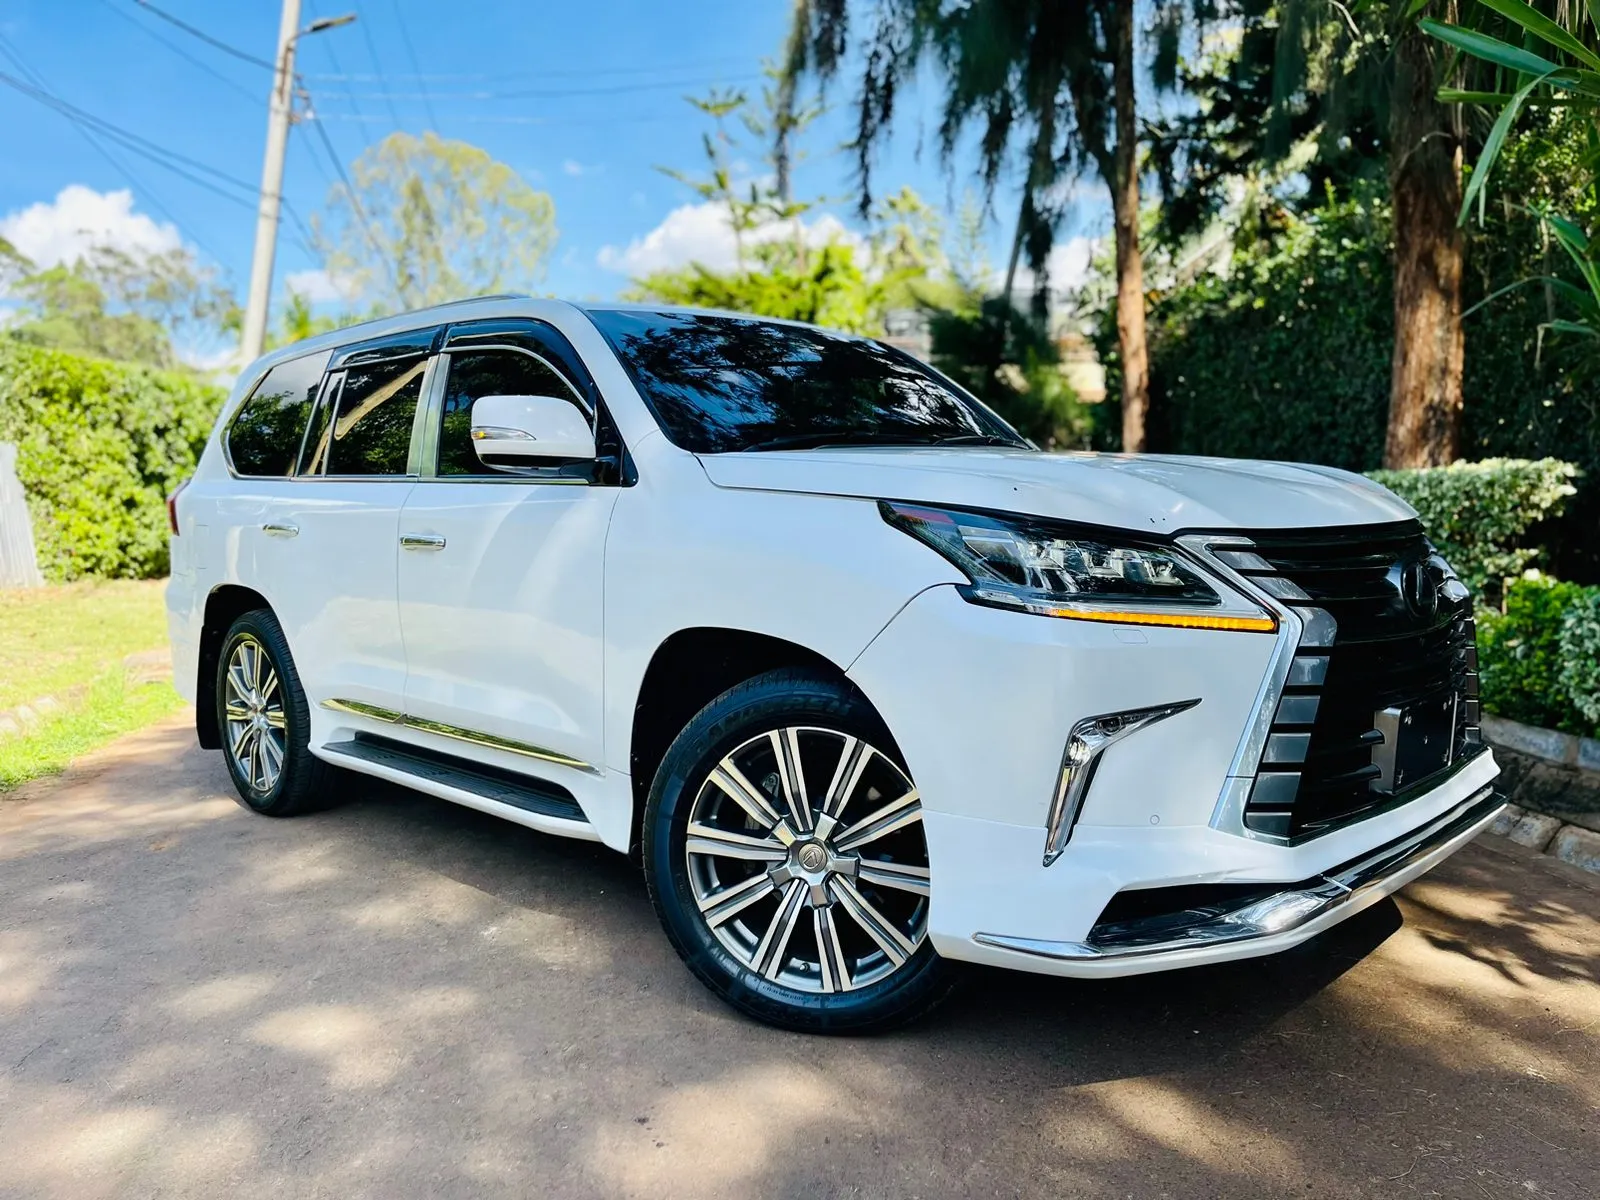 Cars Cars For Sale/Vehicles-LEXUS LX 570 2016 Fully Loaded Exclusive CHEAPEST 6